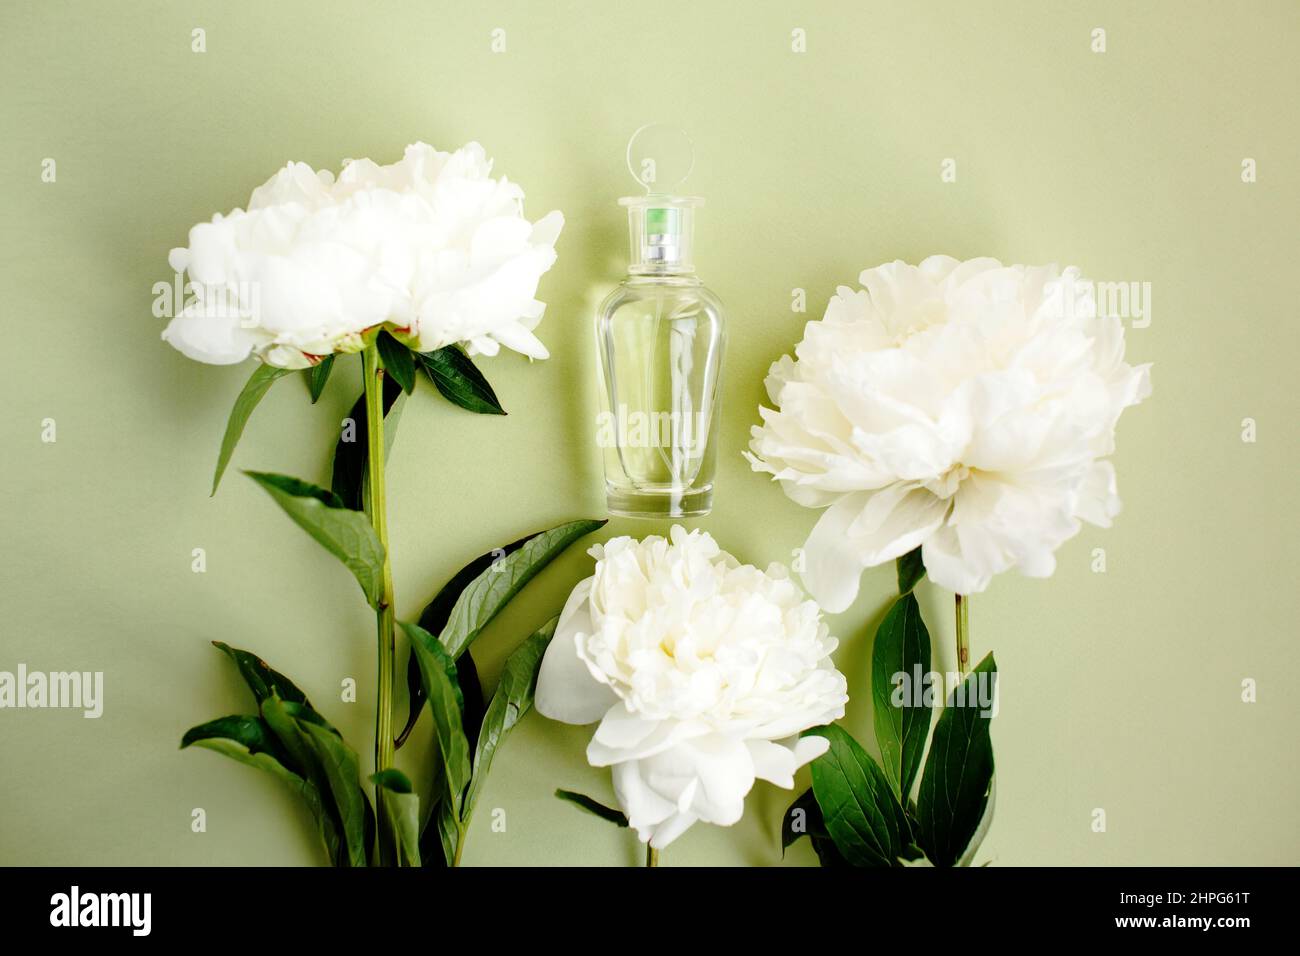 Transparent mockup glass bottle with perfume among fresh white peony flowers on light green pastel color, top view Stock Photo